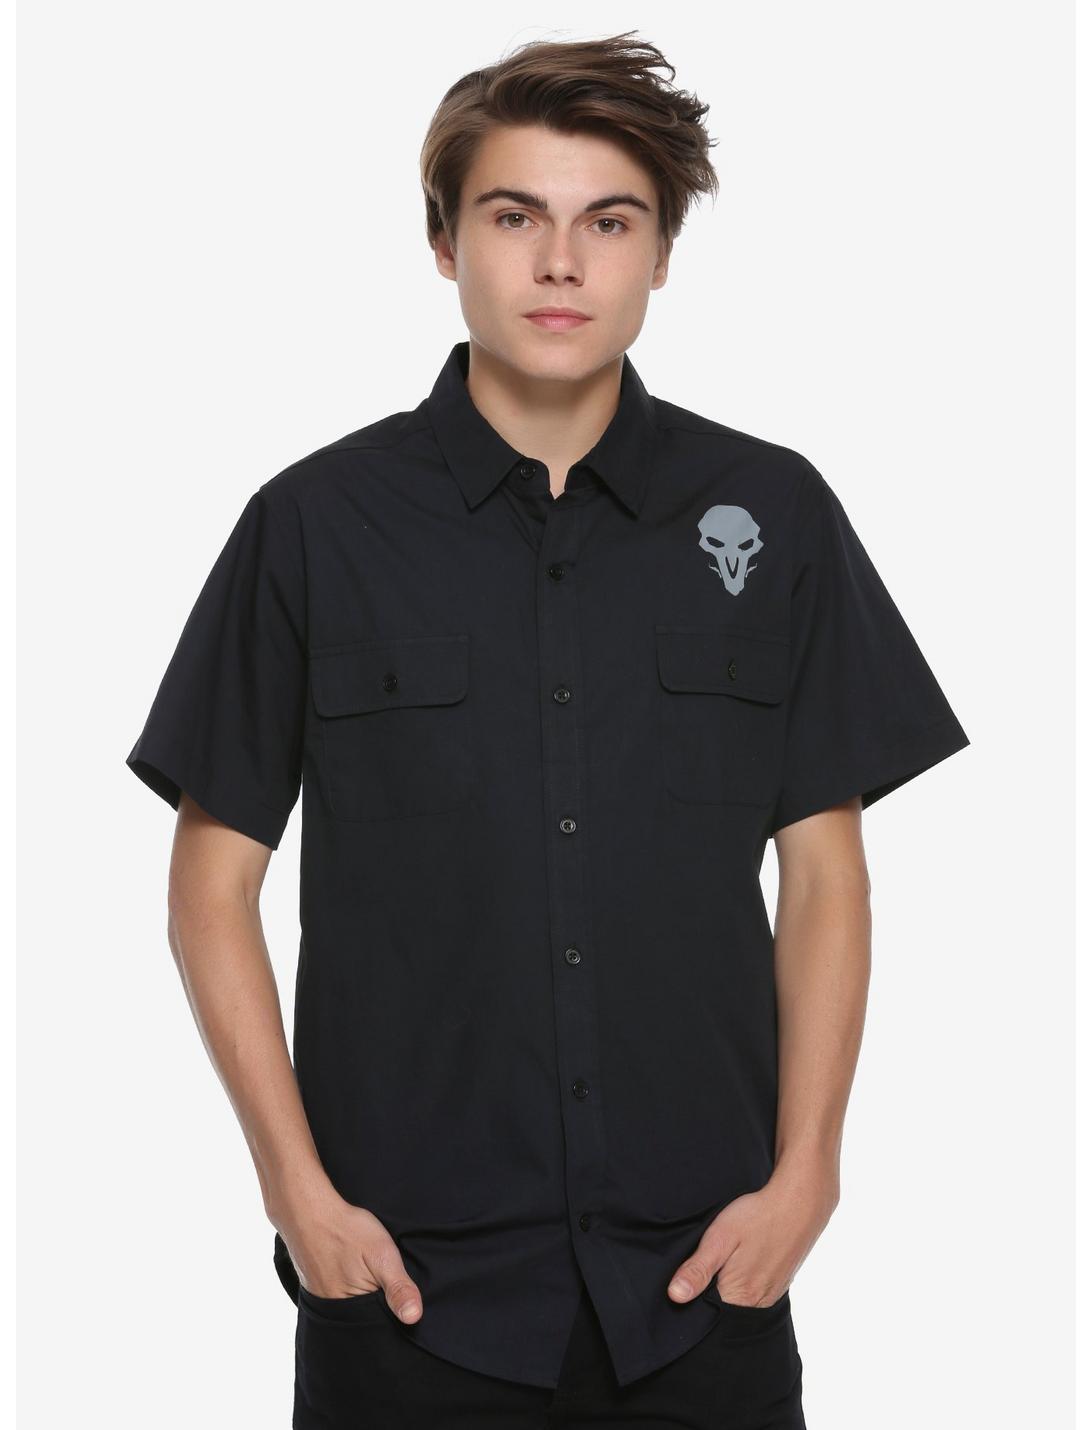 Overwatch Reaper Woven Button-Up Hot Topic Exclusive, BLACK, hi-res